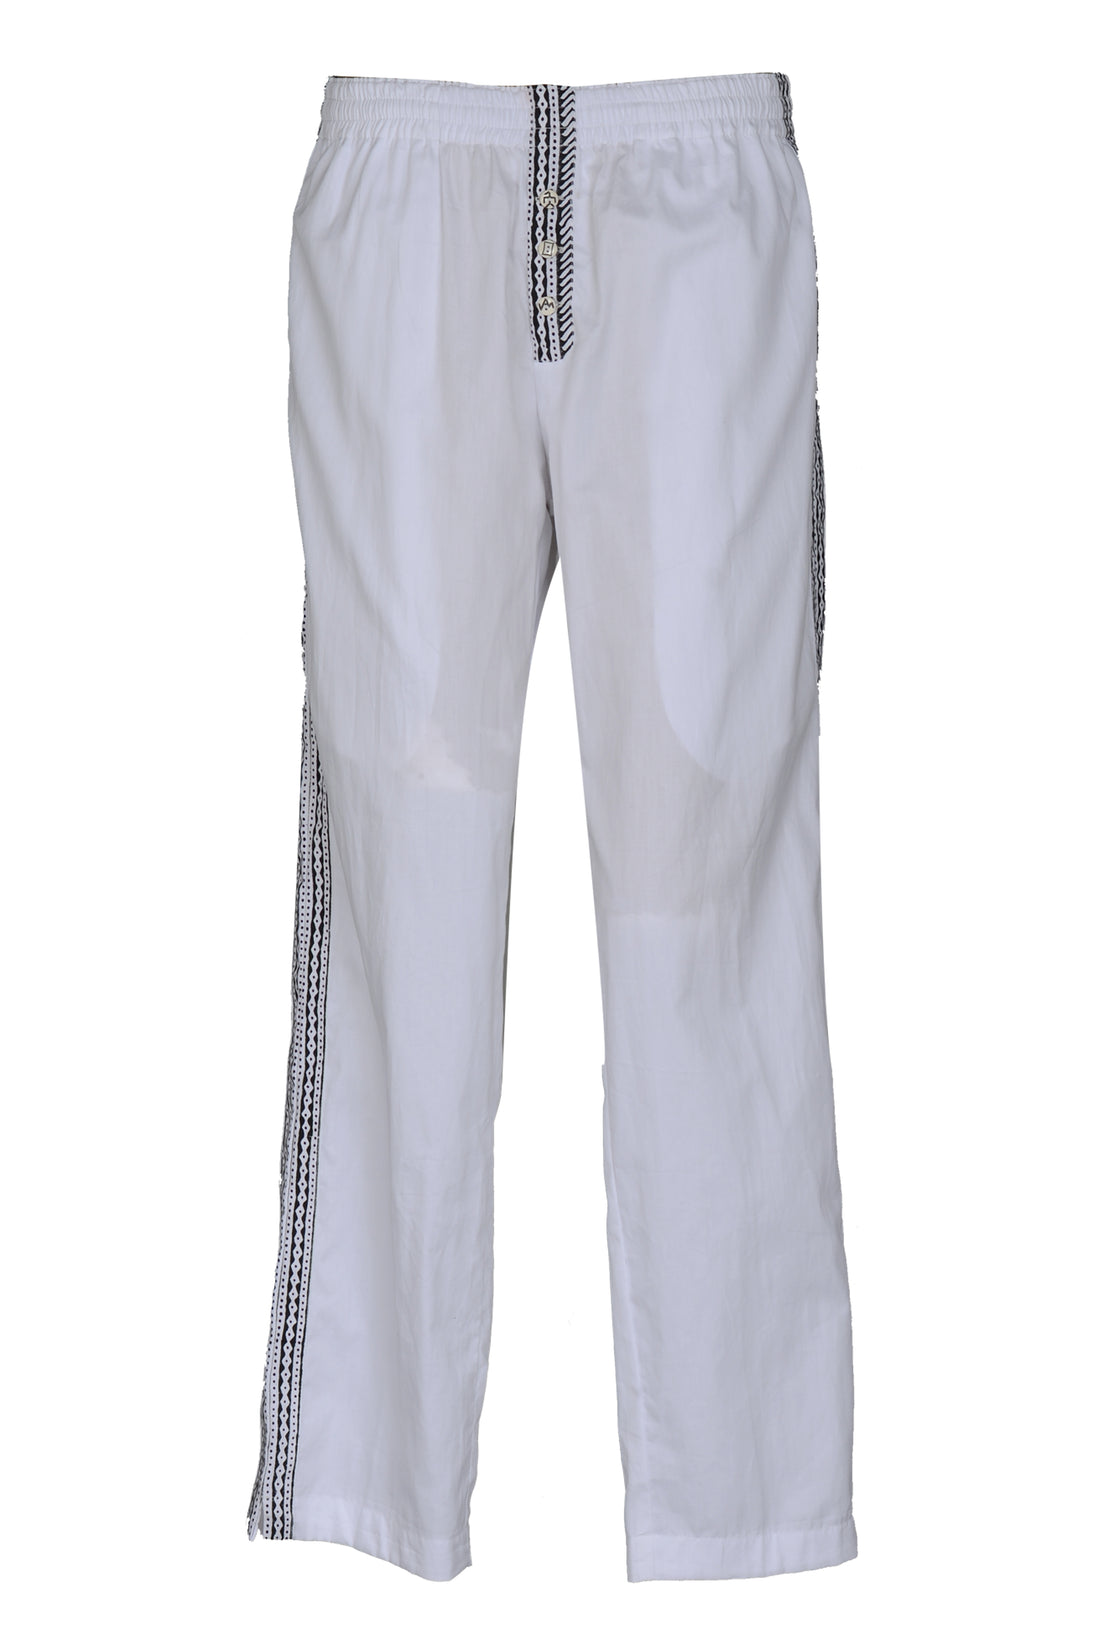 Lio Pants - Cotton Twill Carved Wood Block Print with Hand Carved Bone Buttons (7305853239492)